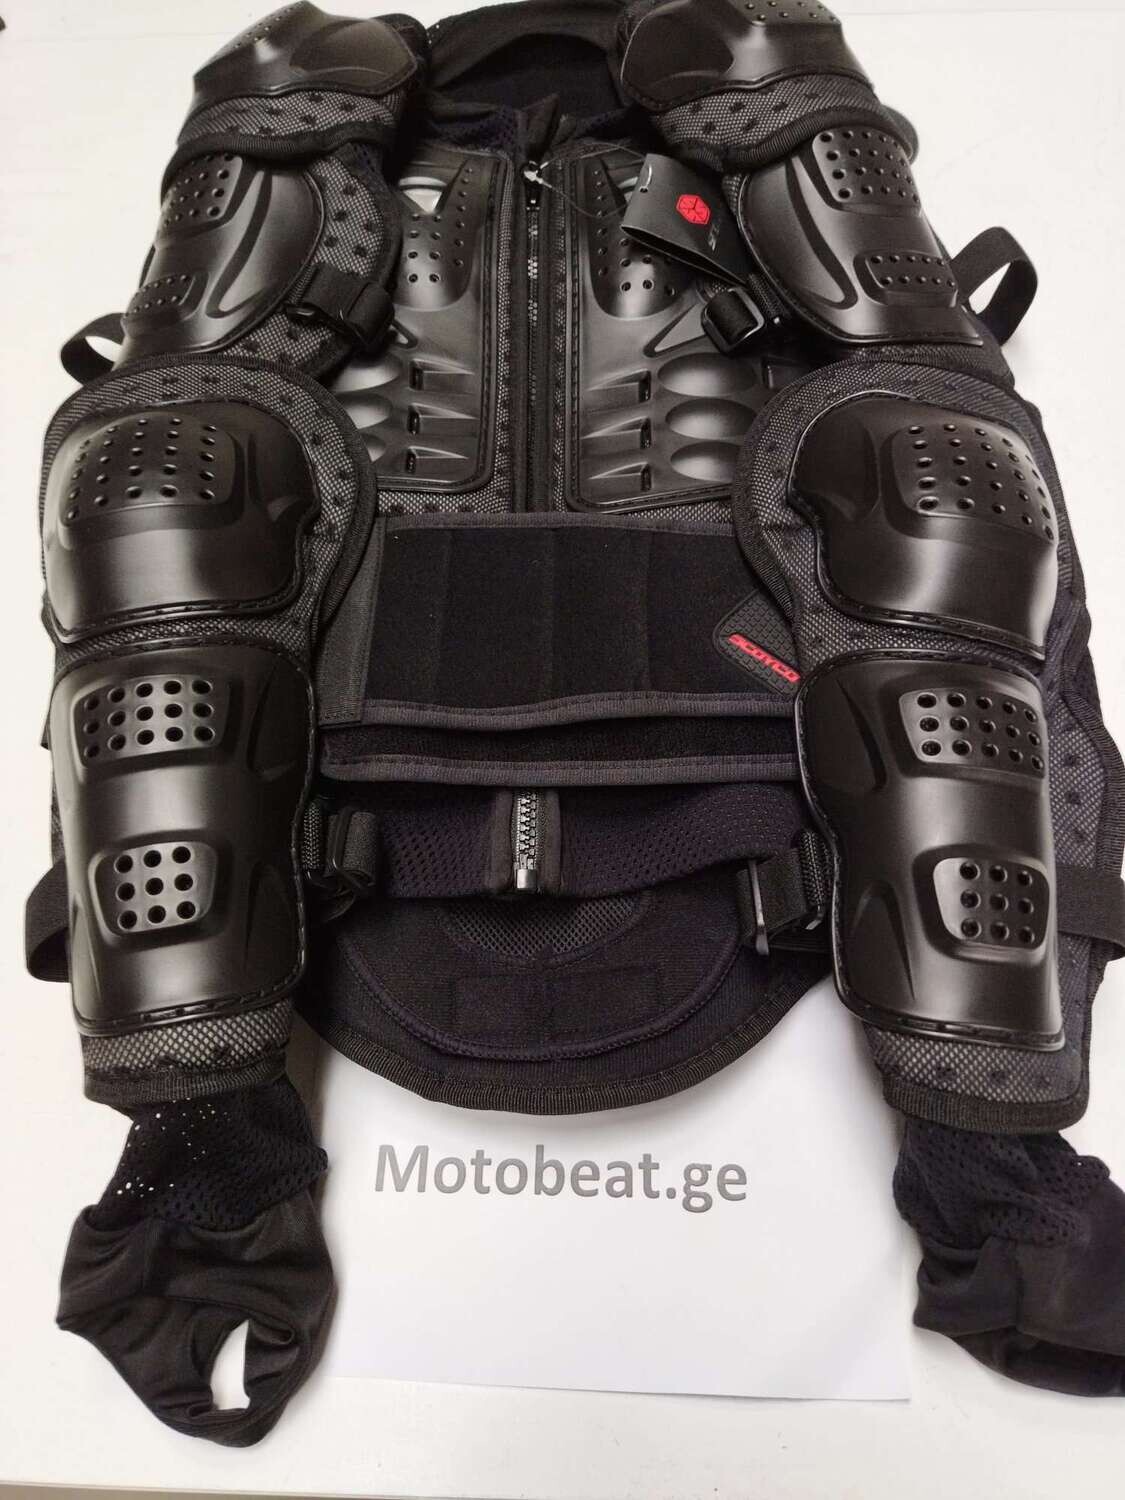 ​Motorcycle Protection Amor Safety Chest Back Protector Armor Gear MBX Vest Moto Armor Motocross Gear Vest clothing